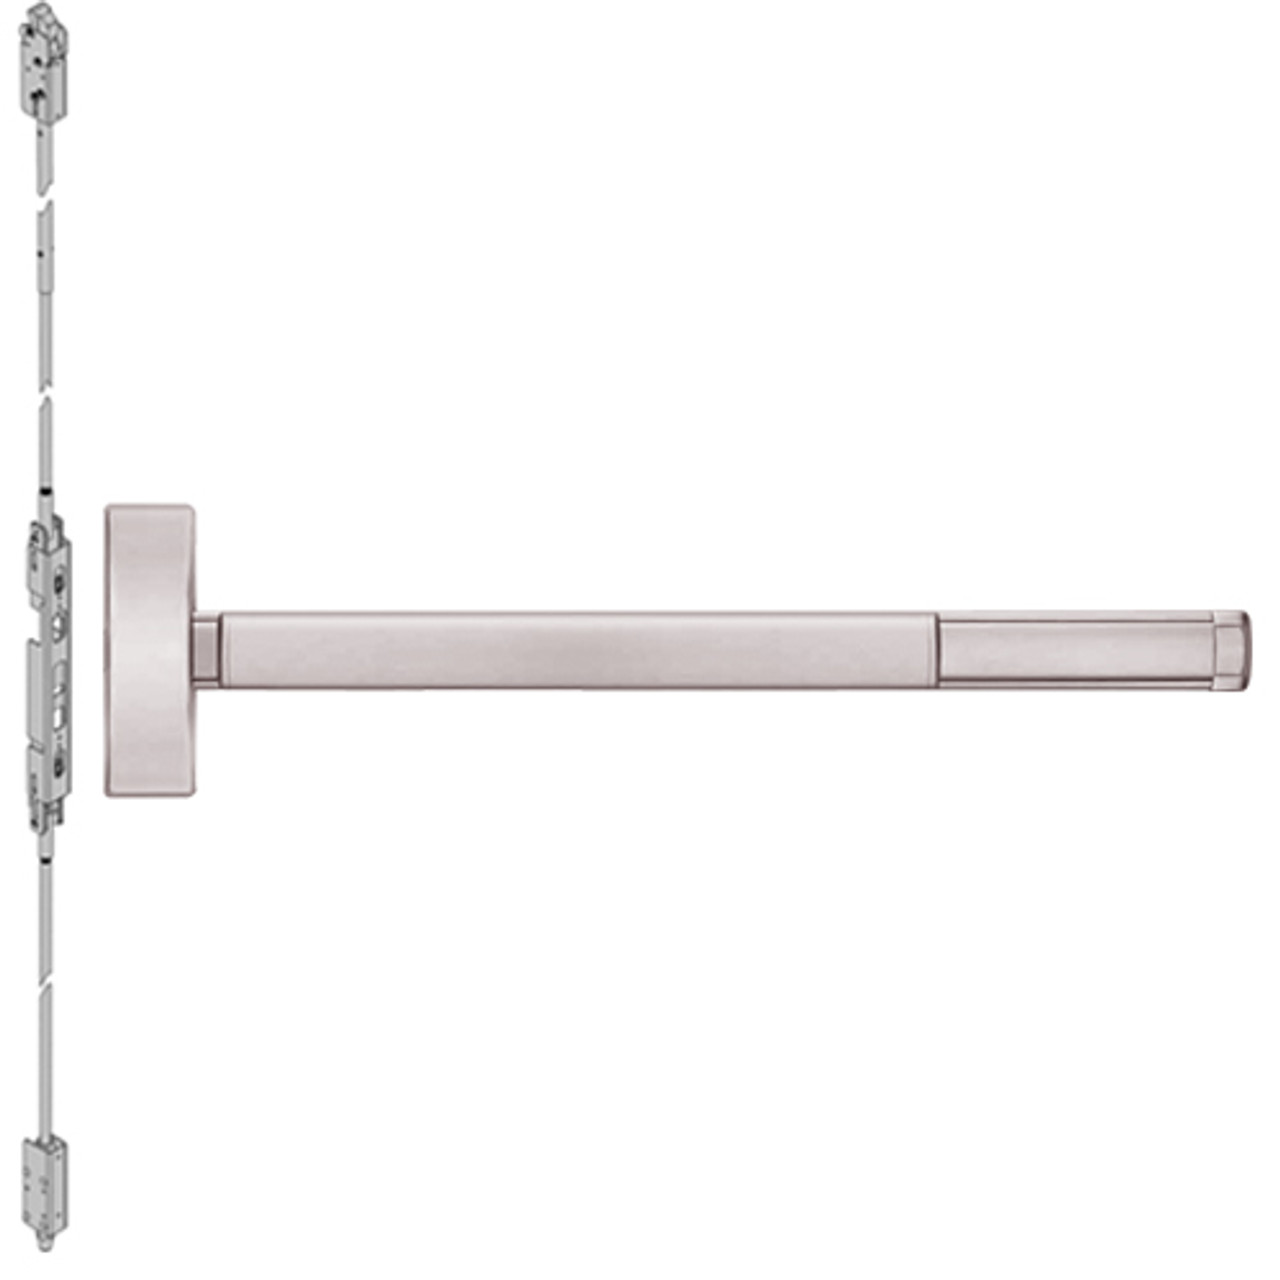 2815CD-628-48 PHI 2800 Series Non Fire Rated Concealed Vertical Rod Exit Device Prepped for Thumbpiece Always Active in Satin Aluminum Finish